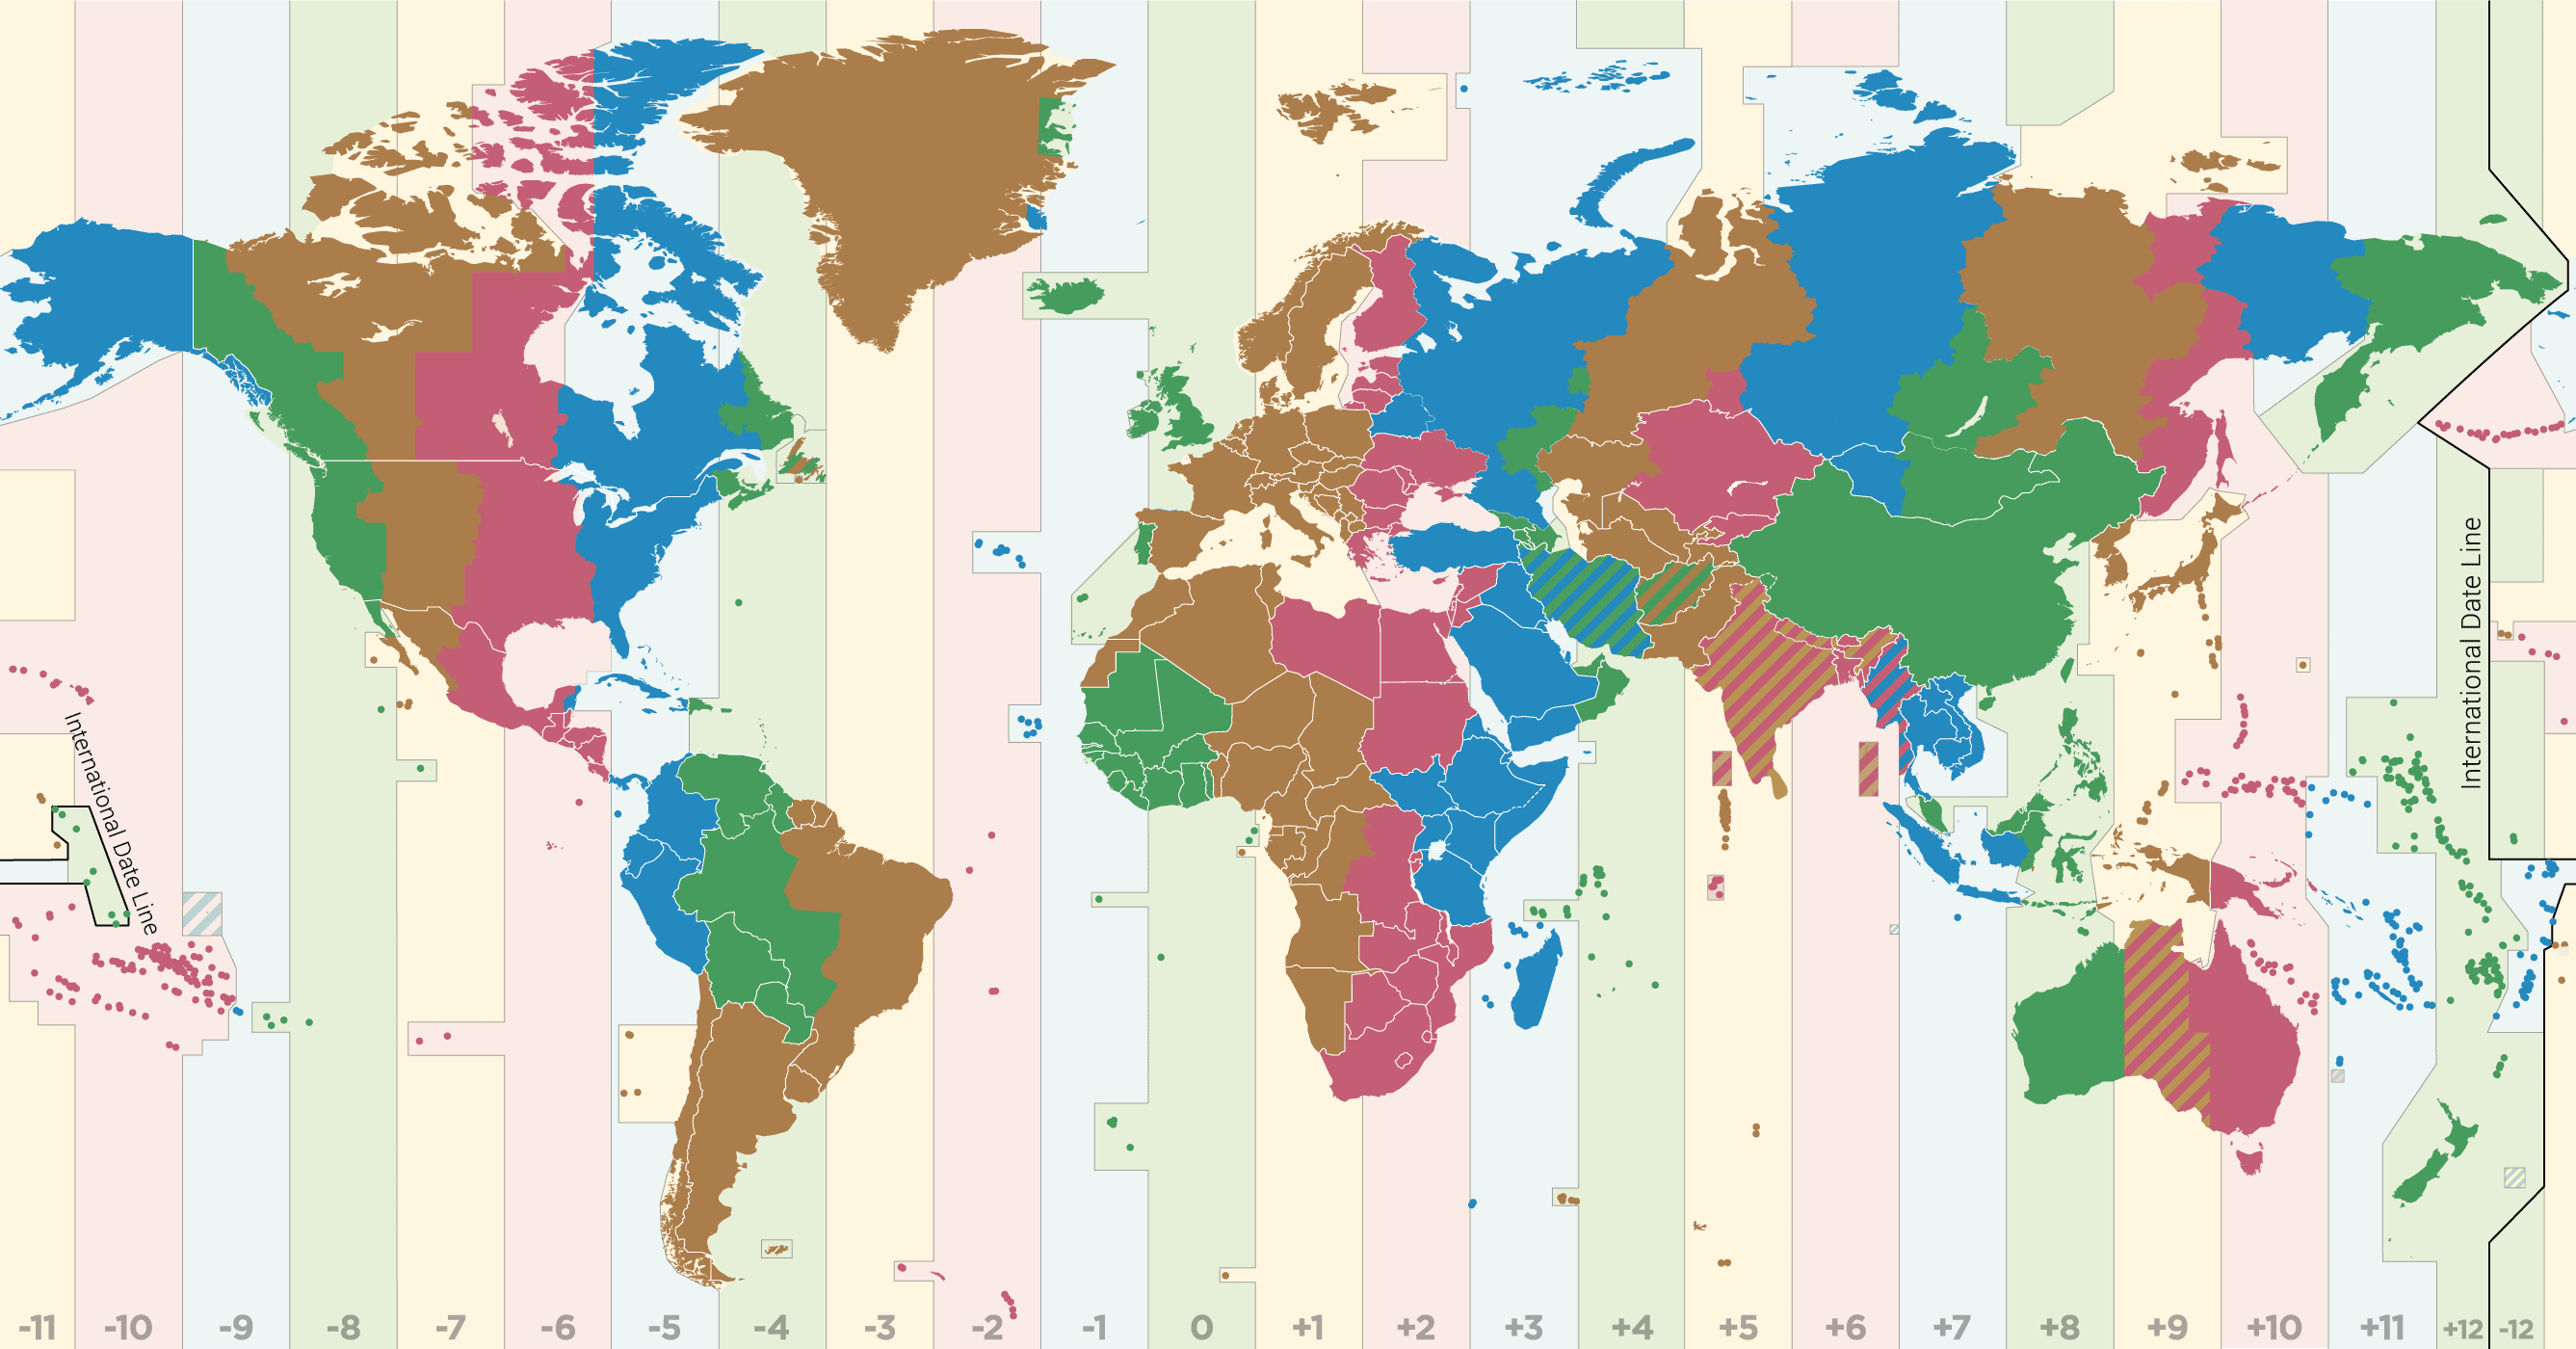 World Time Map